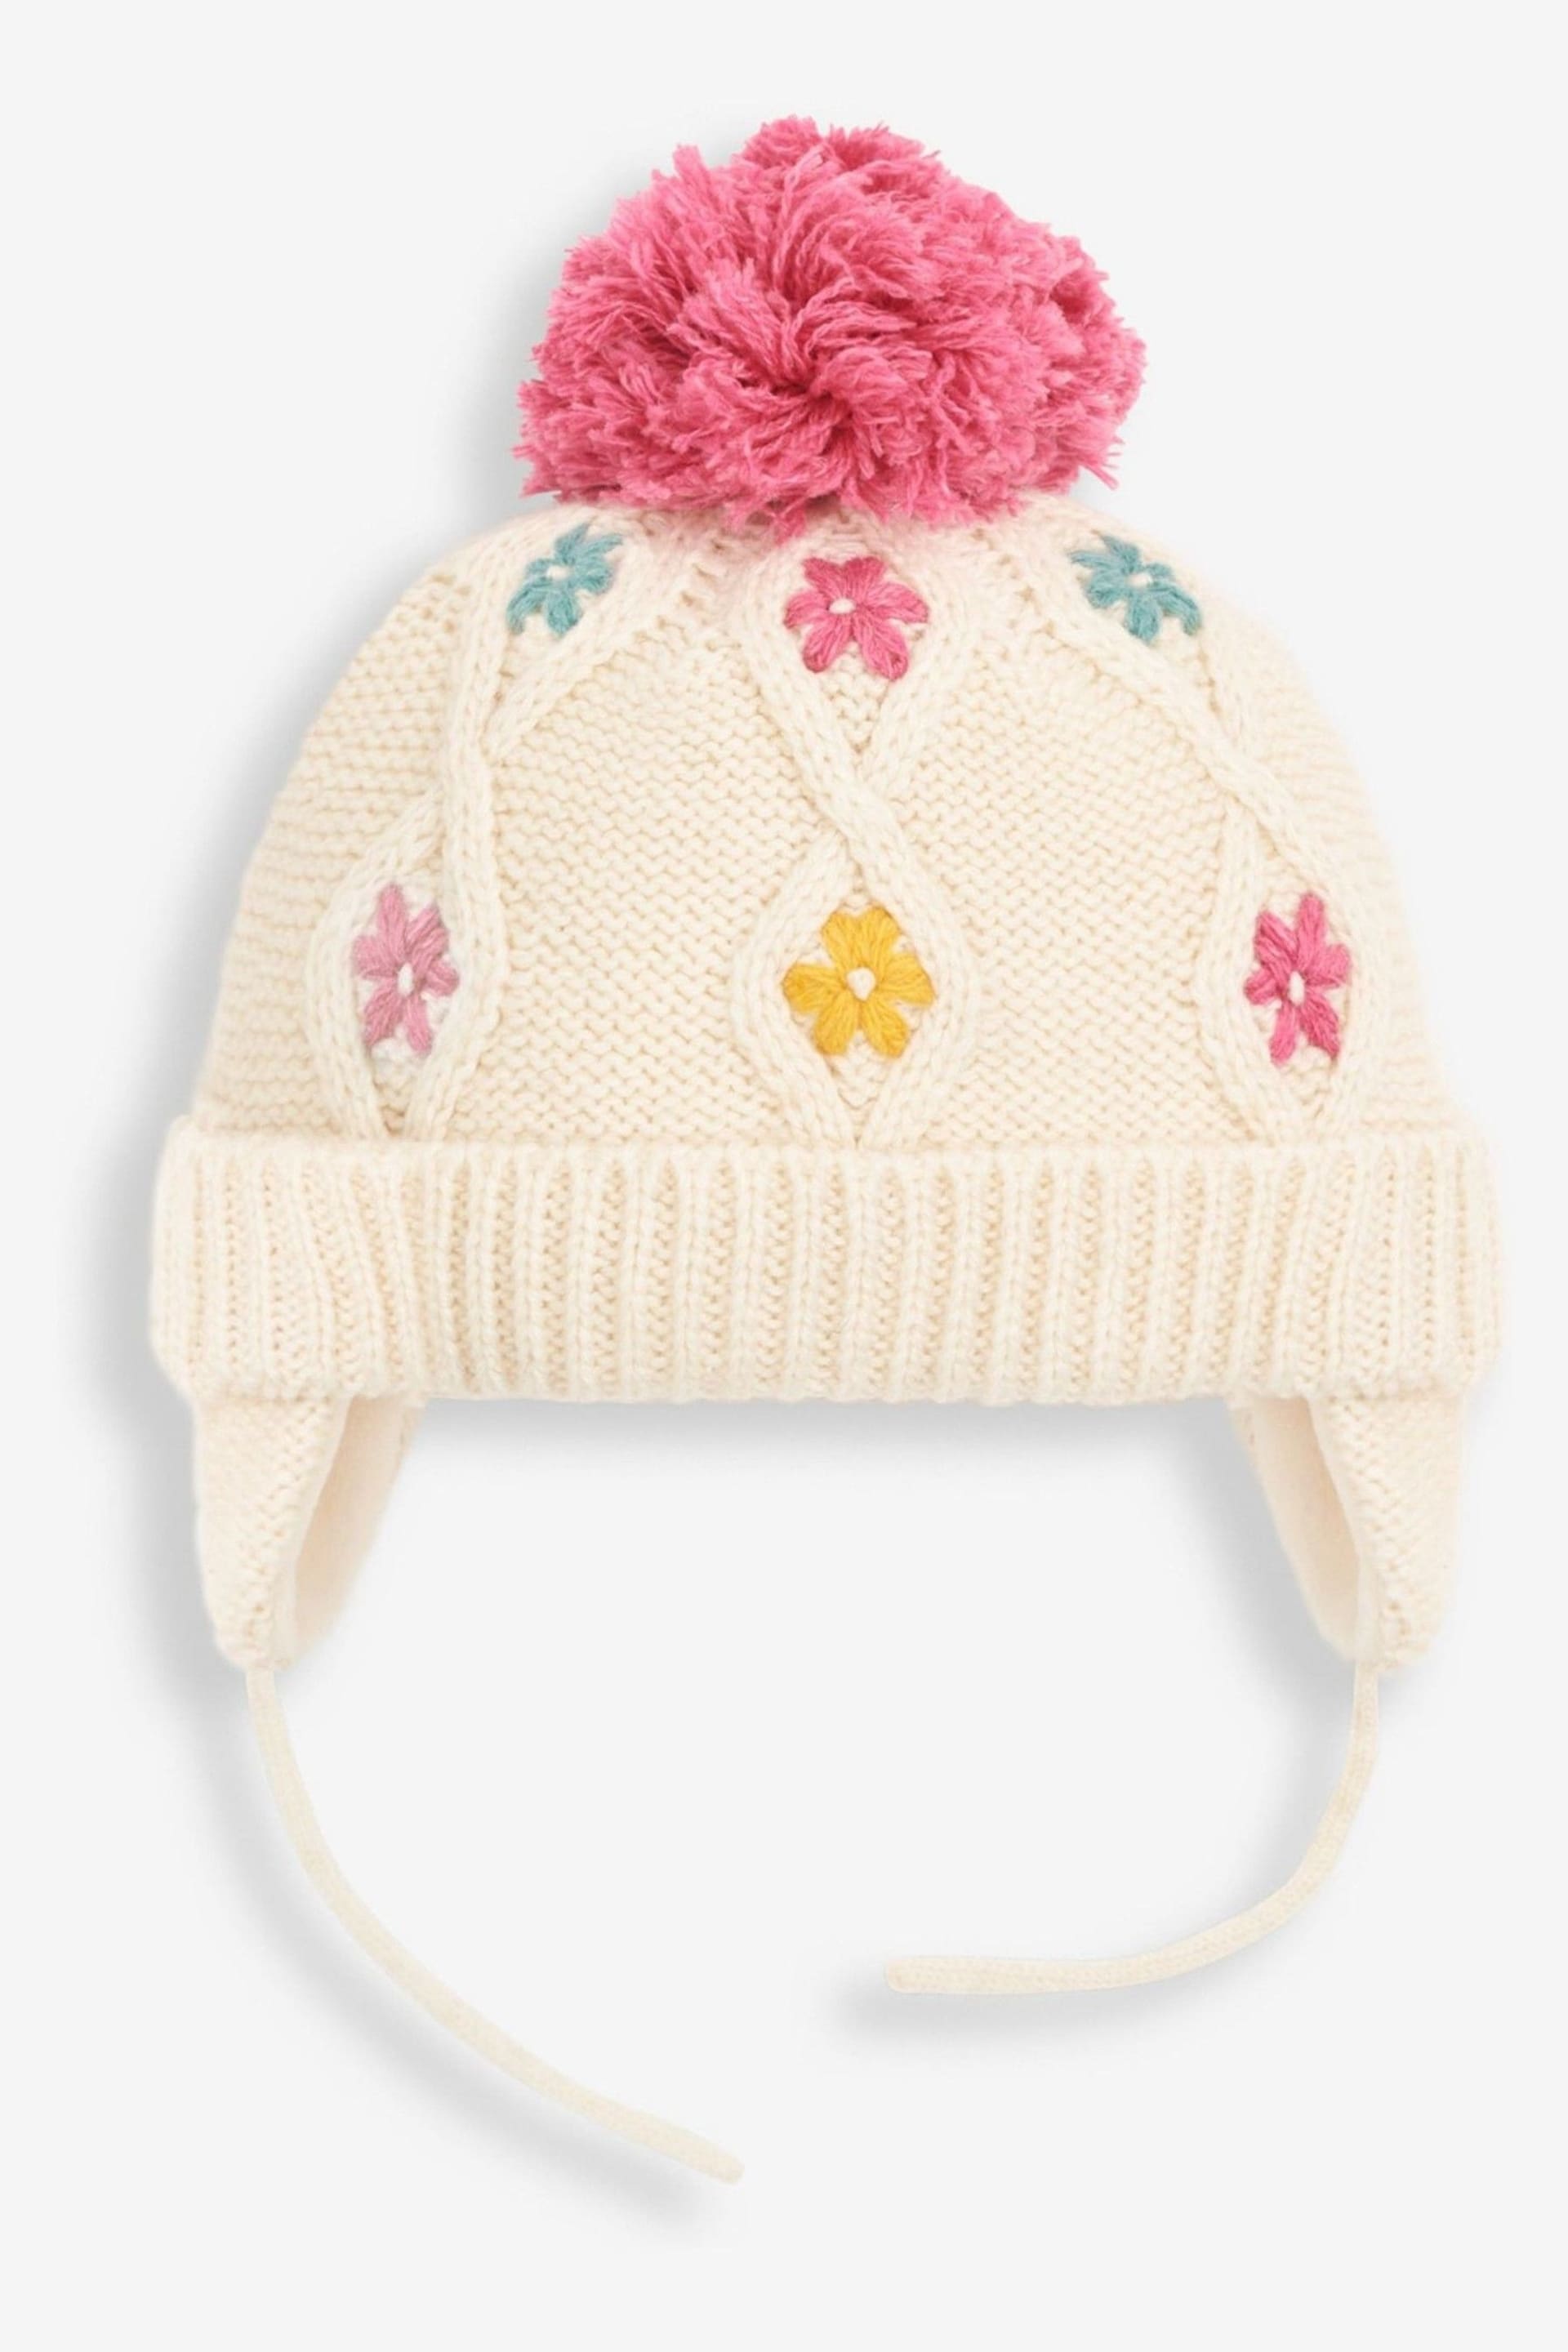 JoJo Maman Bébé Cream Floral Embroidered Cable Hat - Image 1 of 4